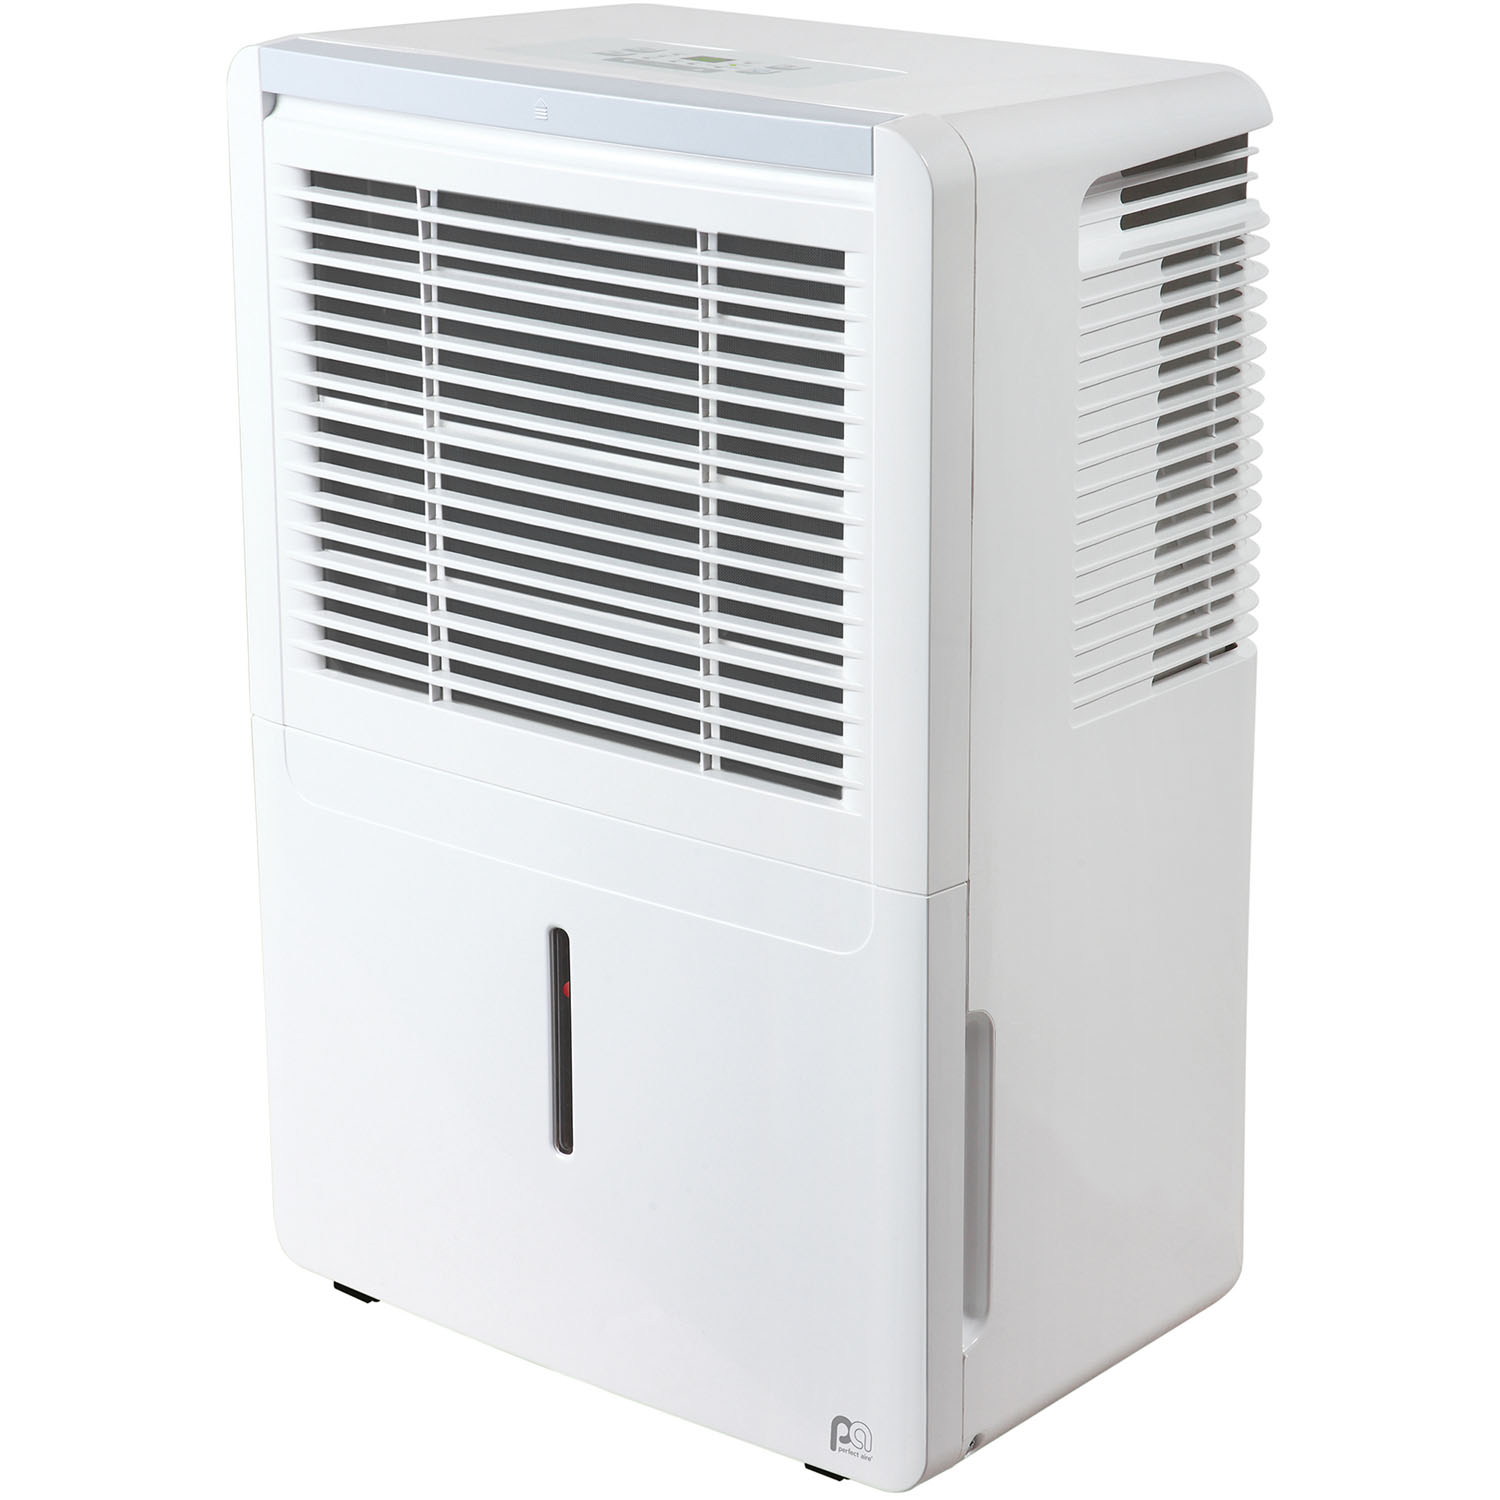 Perfect Aire Energy Star Rated 50 Pint Dehumidifier - image 1 of 4